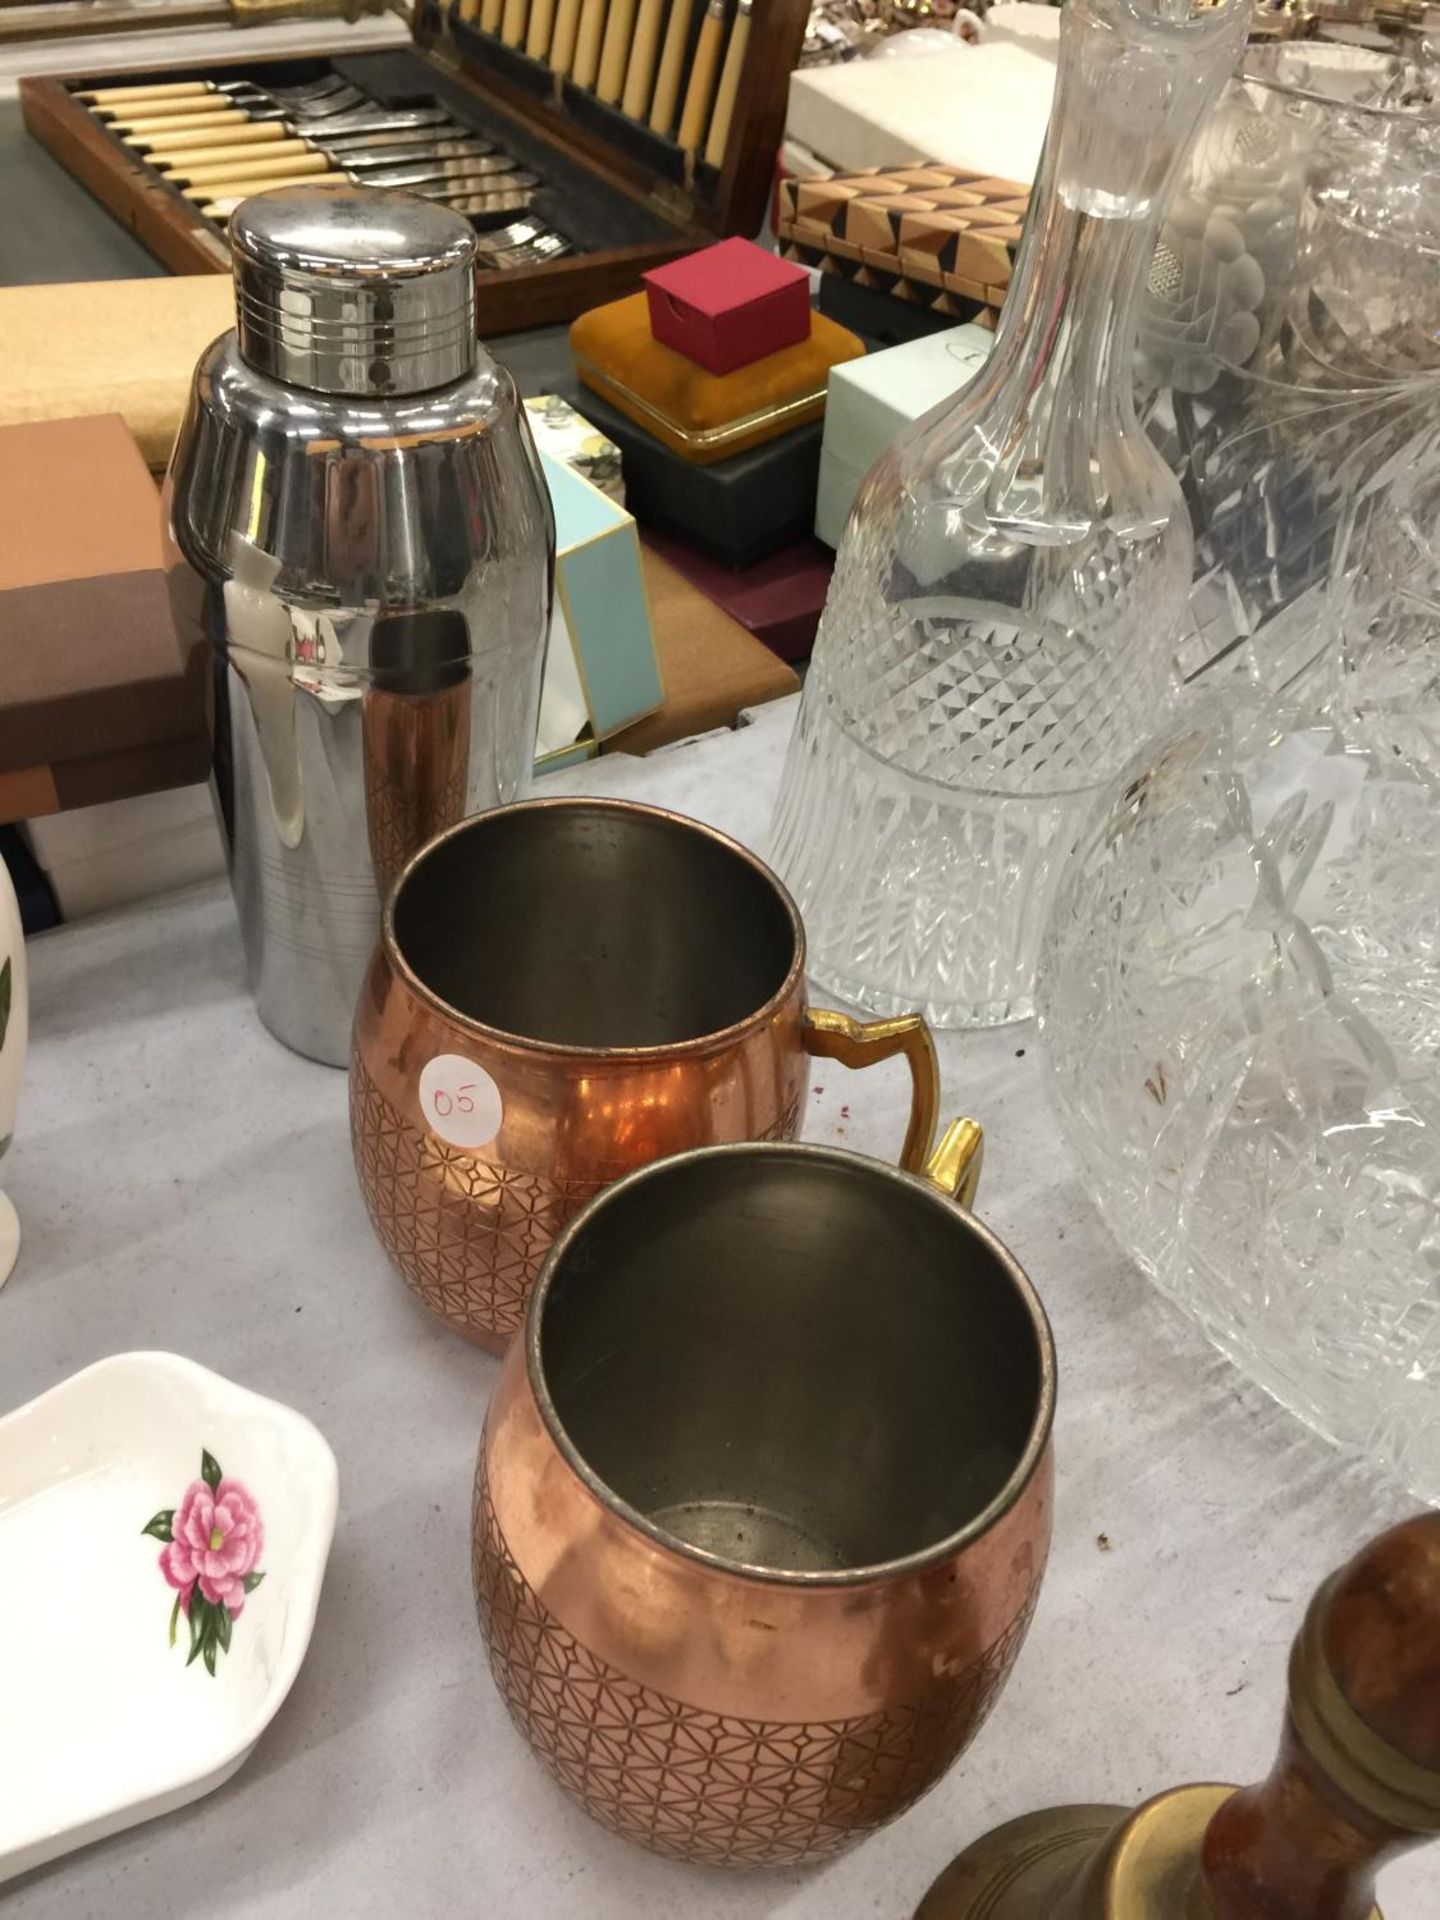 TWO BRASS BELL, TWO COPPER MUGS AND A VINTAGE STYLE COCKTAIL SHAKER - Image 5 of 6